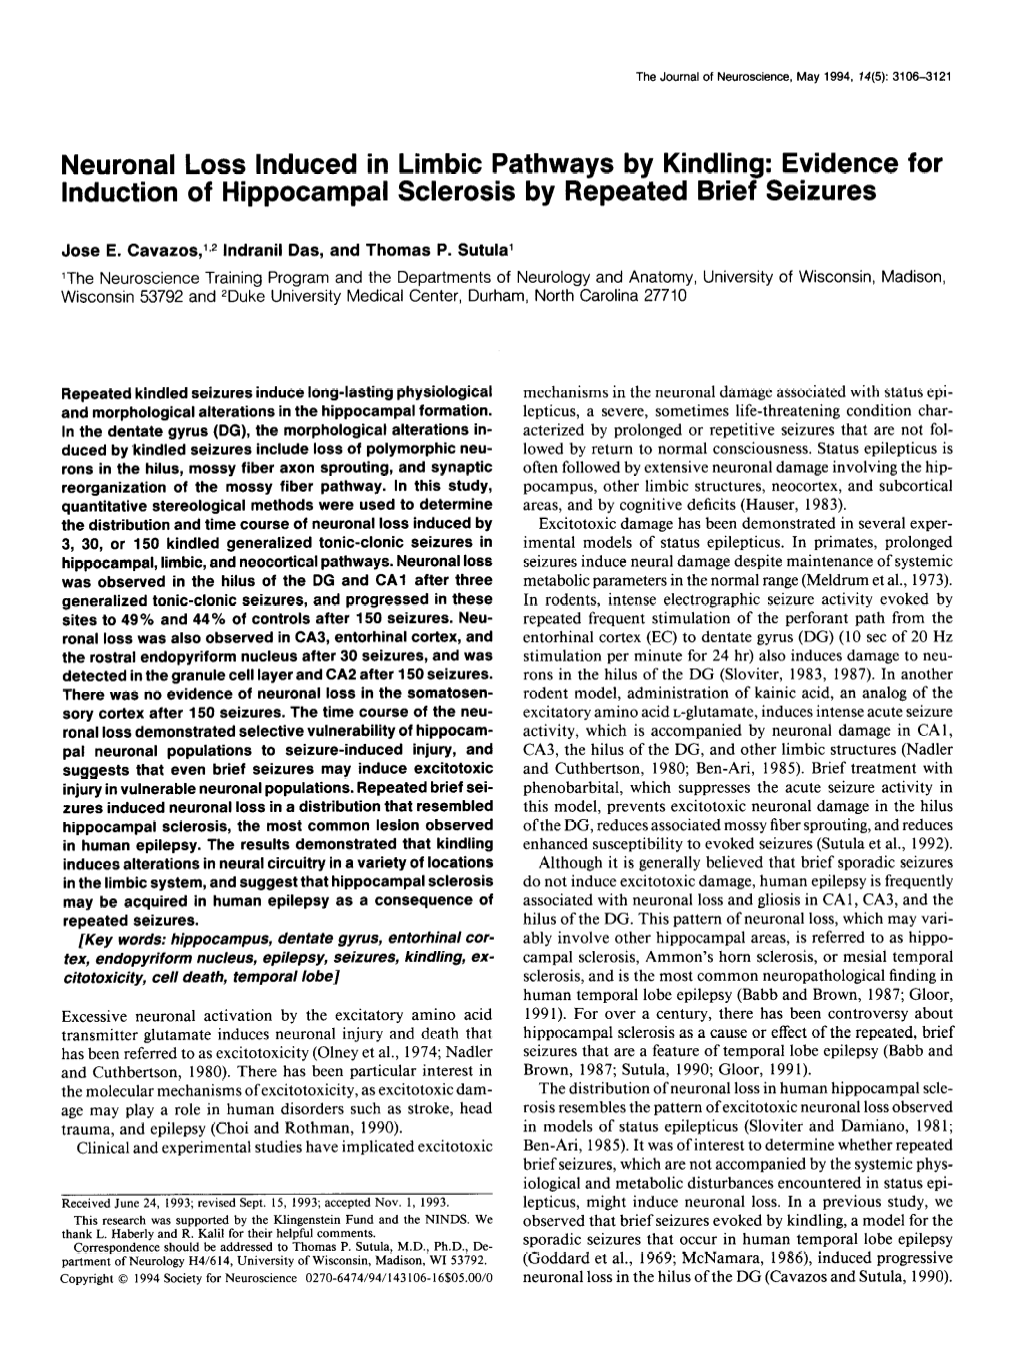 Neuronal Loss Induced in Limbic Pathways by Kindling: Evidence for Induction of Hippocampal Sclerosis by Repeated Brief Seizures